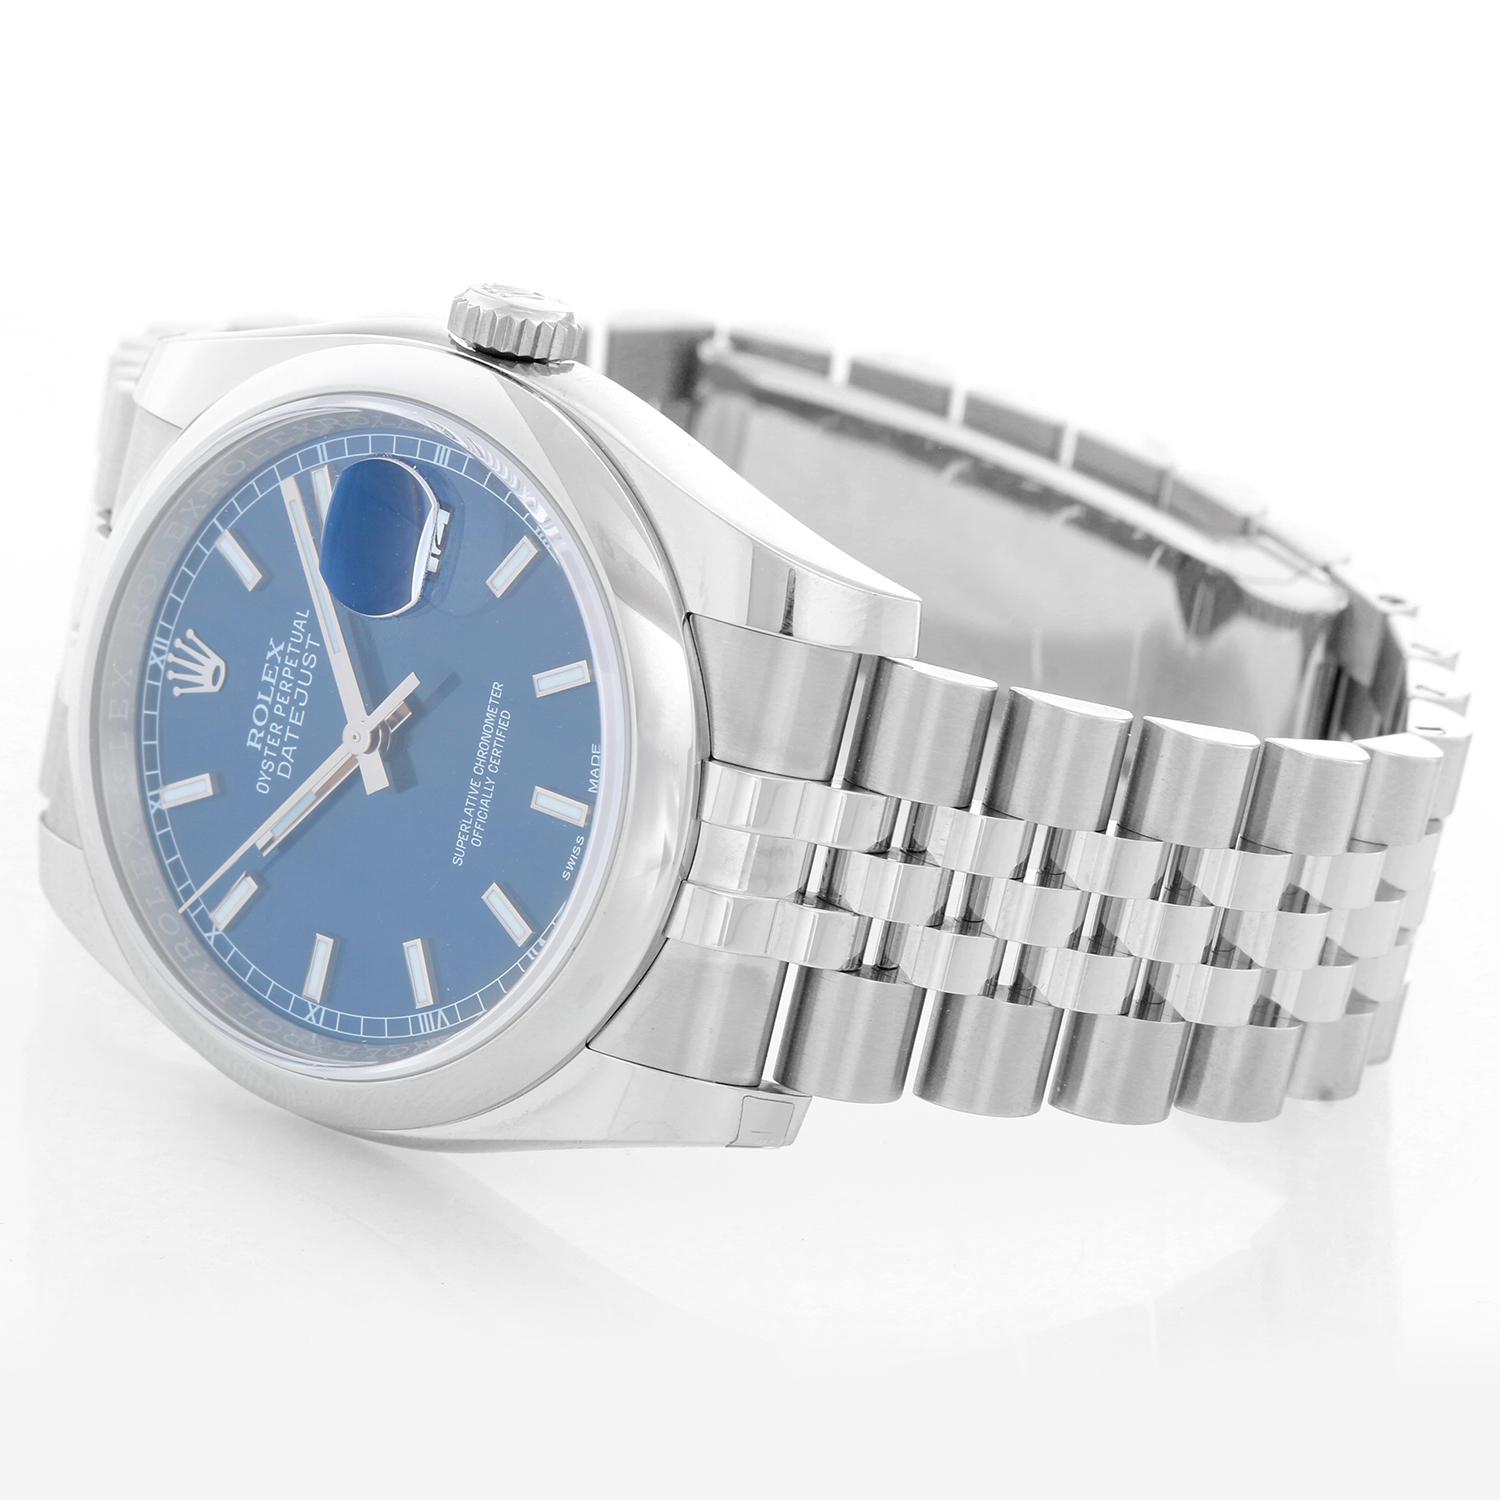 Rolex Datejust Men's Stainless Steel Automatic Winding Watch 116200 - Automatic winding, 31 jewels, Quickset, sapphire crystal. Stainless steel case with smooth bezel (36mm diameter). Blue dial with luminous style markers. Stainless steel Jubilee